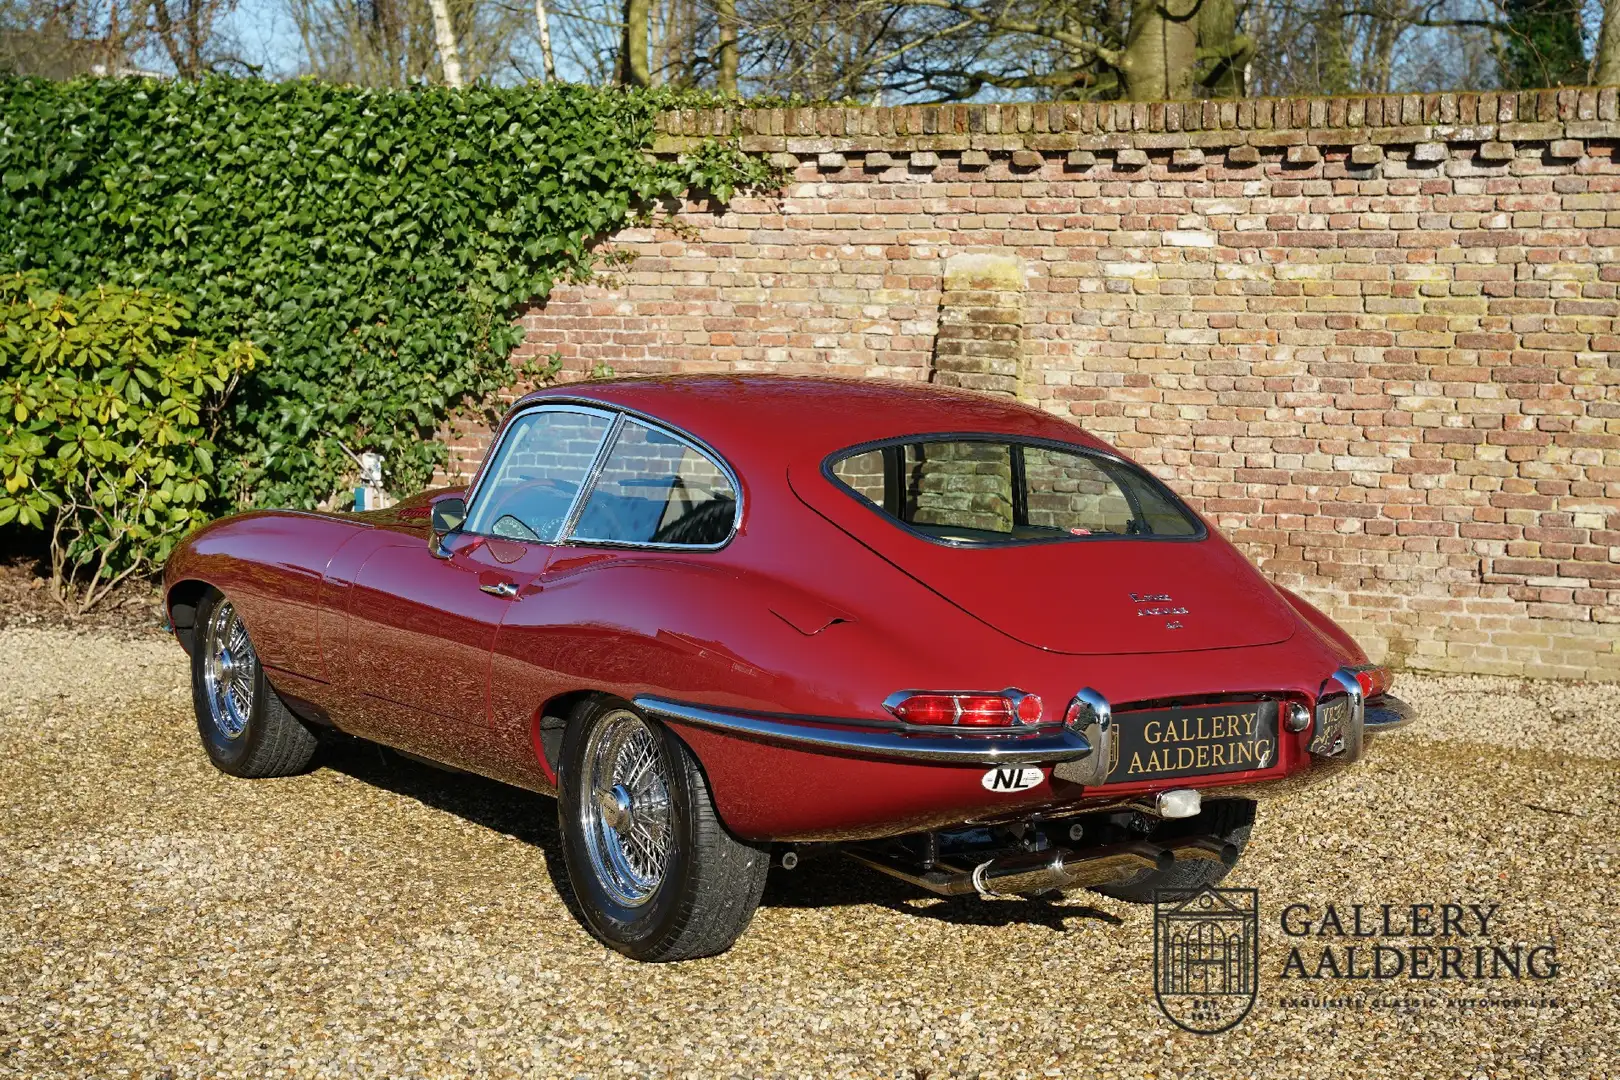 Jaguar E-Type 4.2 coupe series 1.5 Superb restored condition, Ma Rood - 2